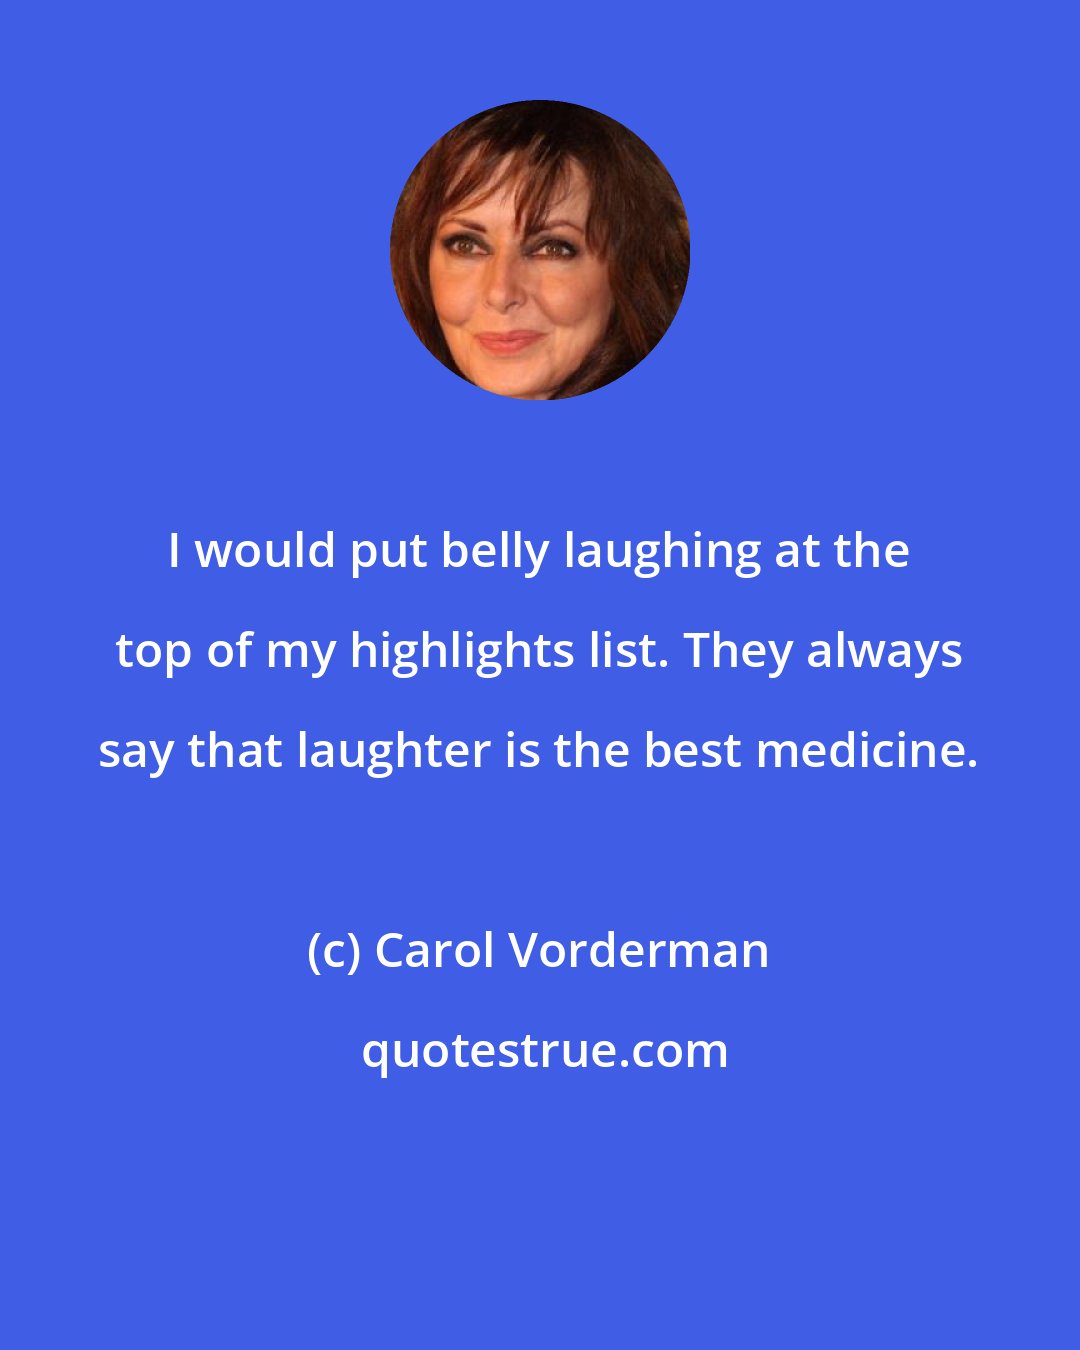 Carol Vorderman: I would put belly laughing at the top of my highlights list. They always say that laughter is the best medicine.